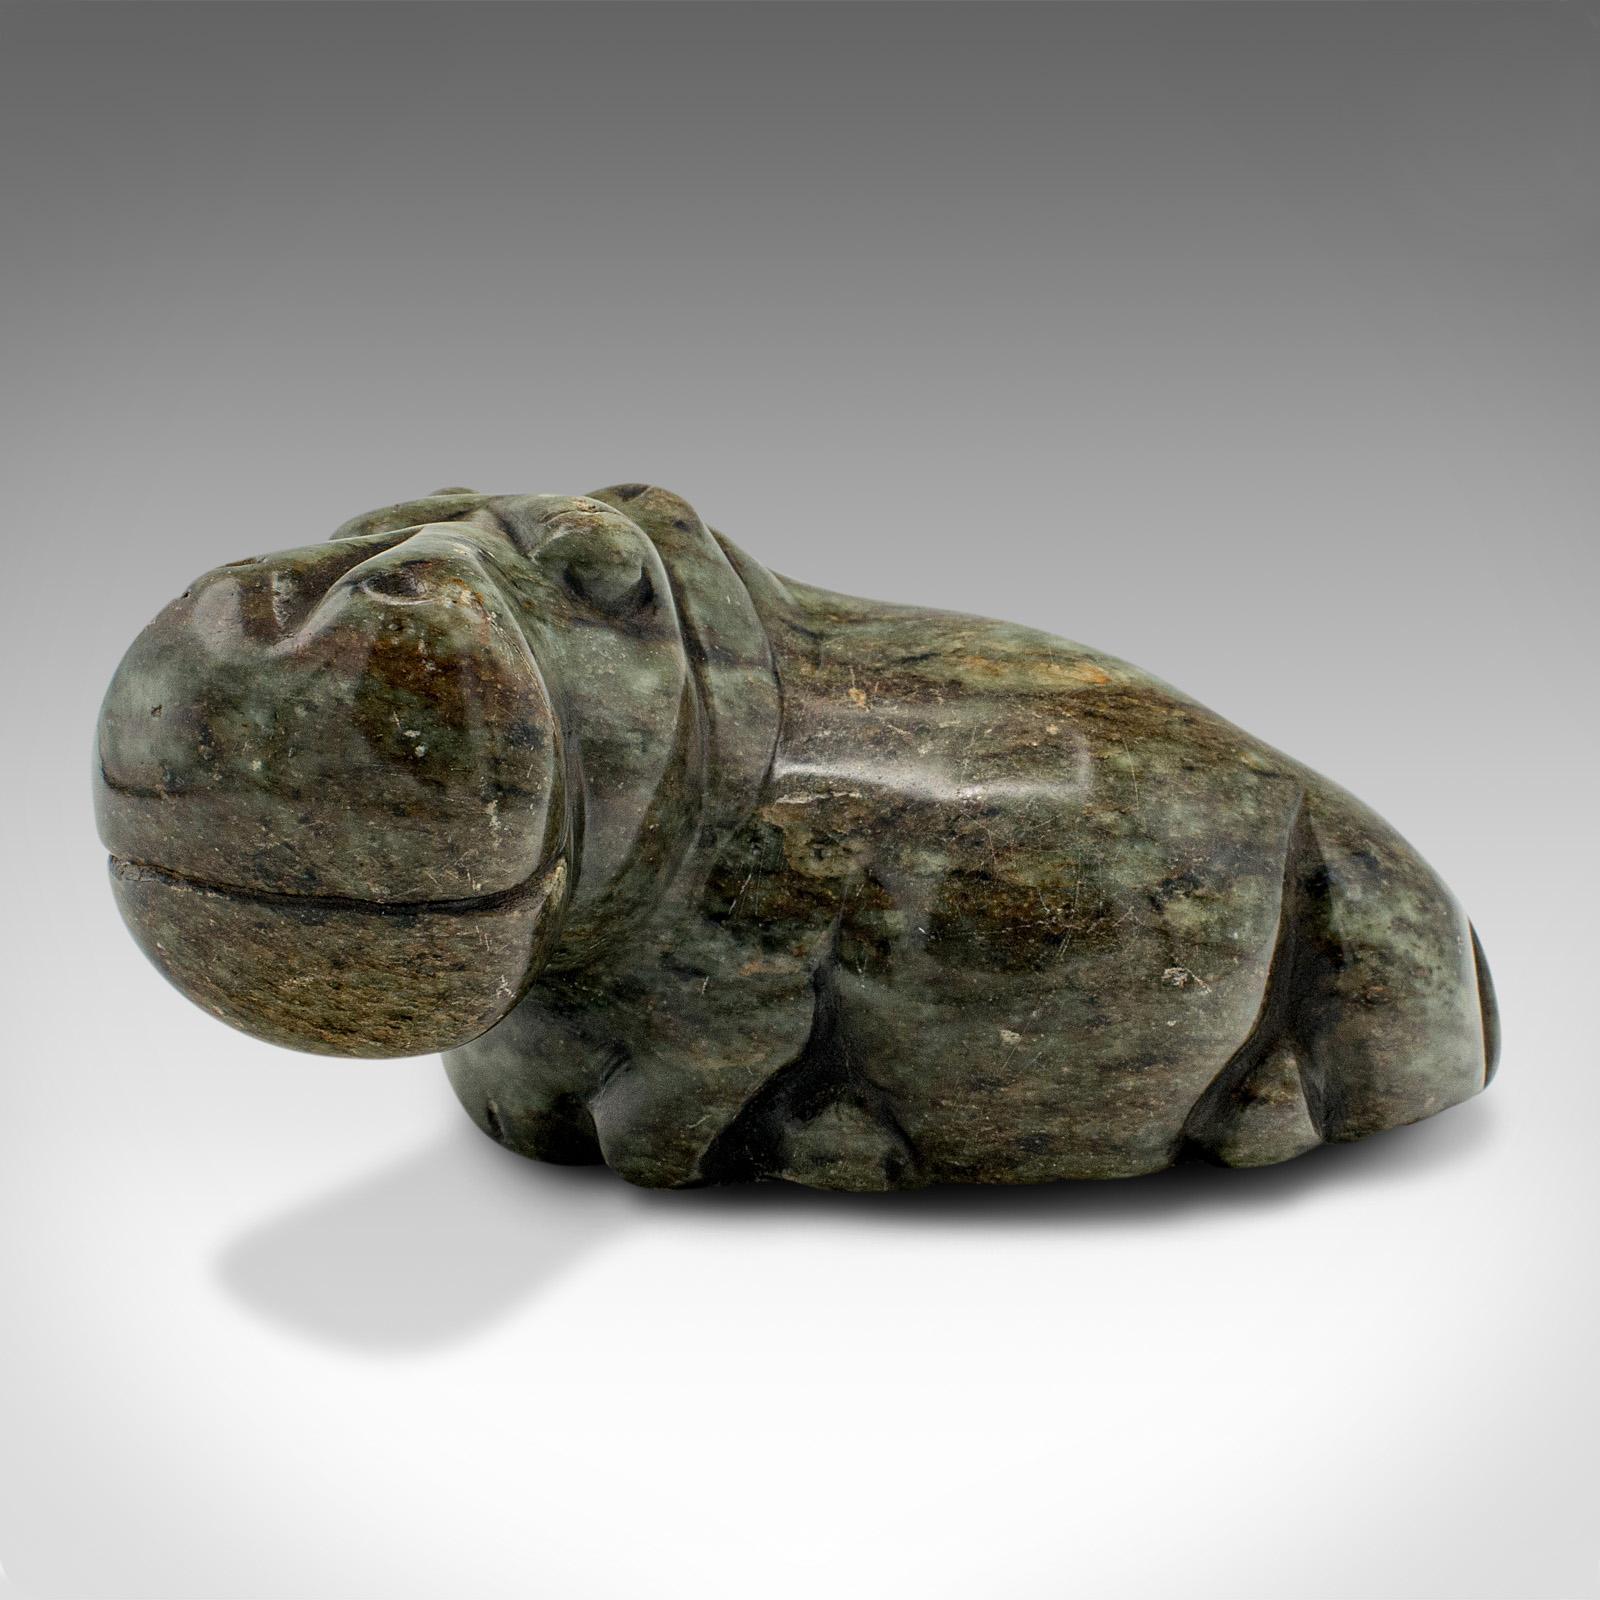 This is a small antique hippopotamus figure. An African, hand-carved soapstone animal, dating to the late Victorian period, circa 1900.

Adorable and jovial, with superb stone interest
Displays a desirable aged patina throughout
Soapstone